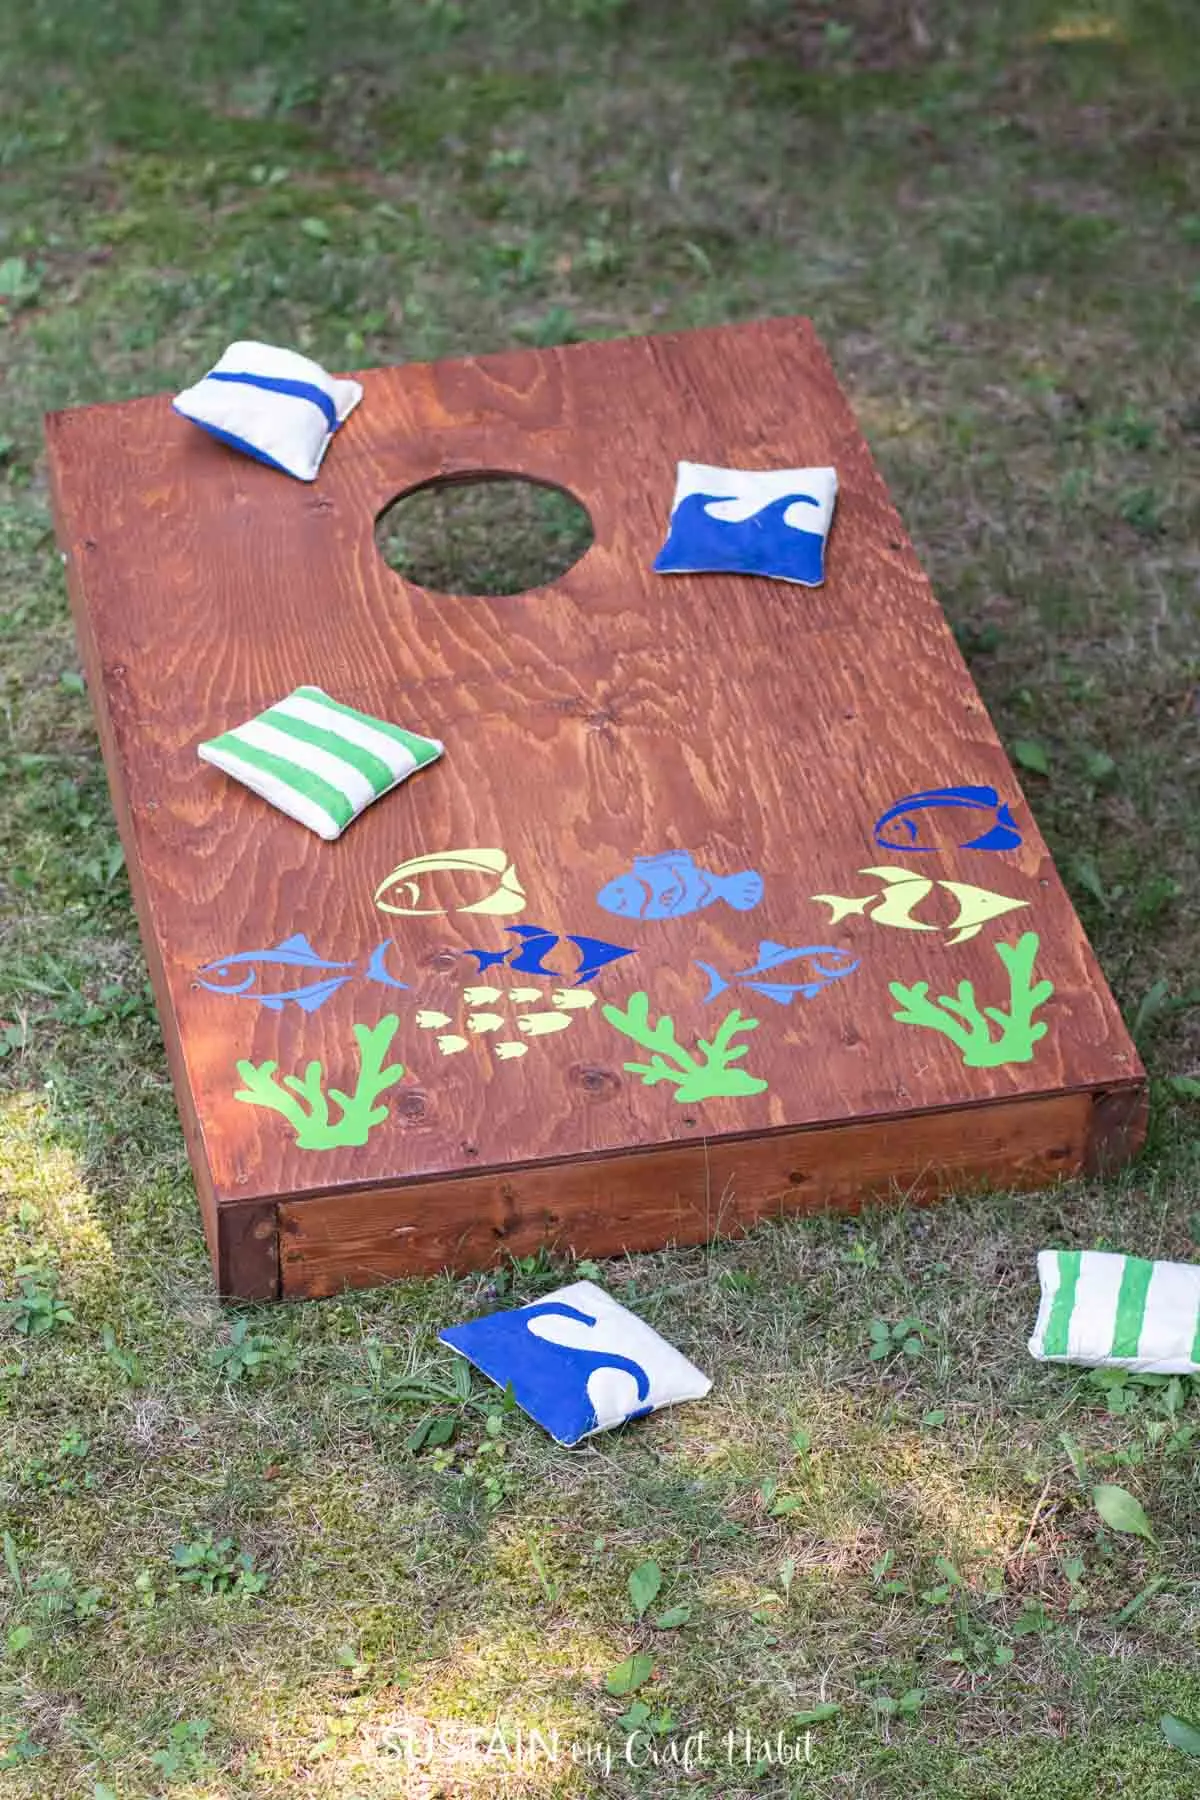 Cornhole board game embellished with fish decals using Cricut Joy and Smart Vinyl.